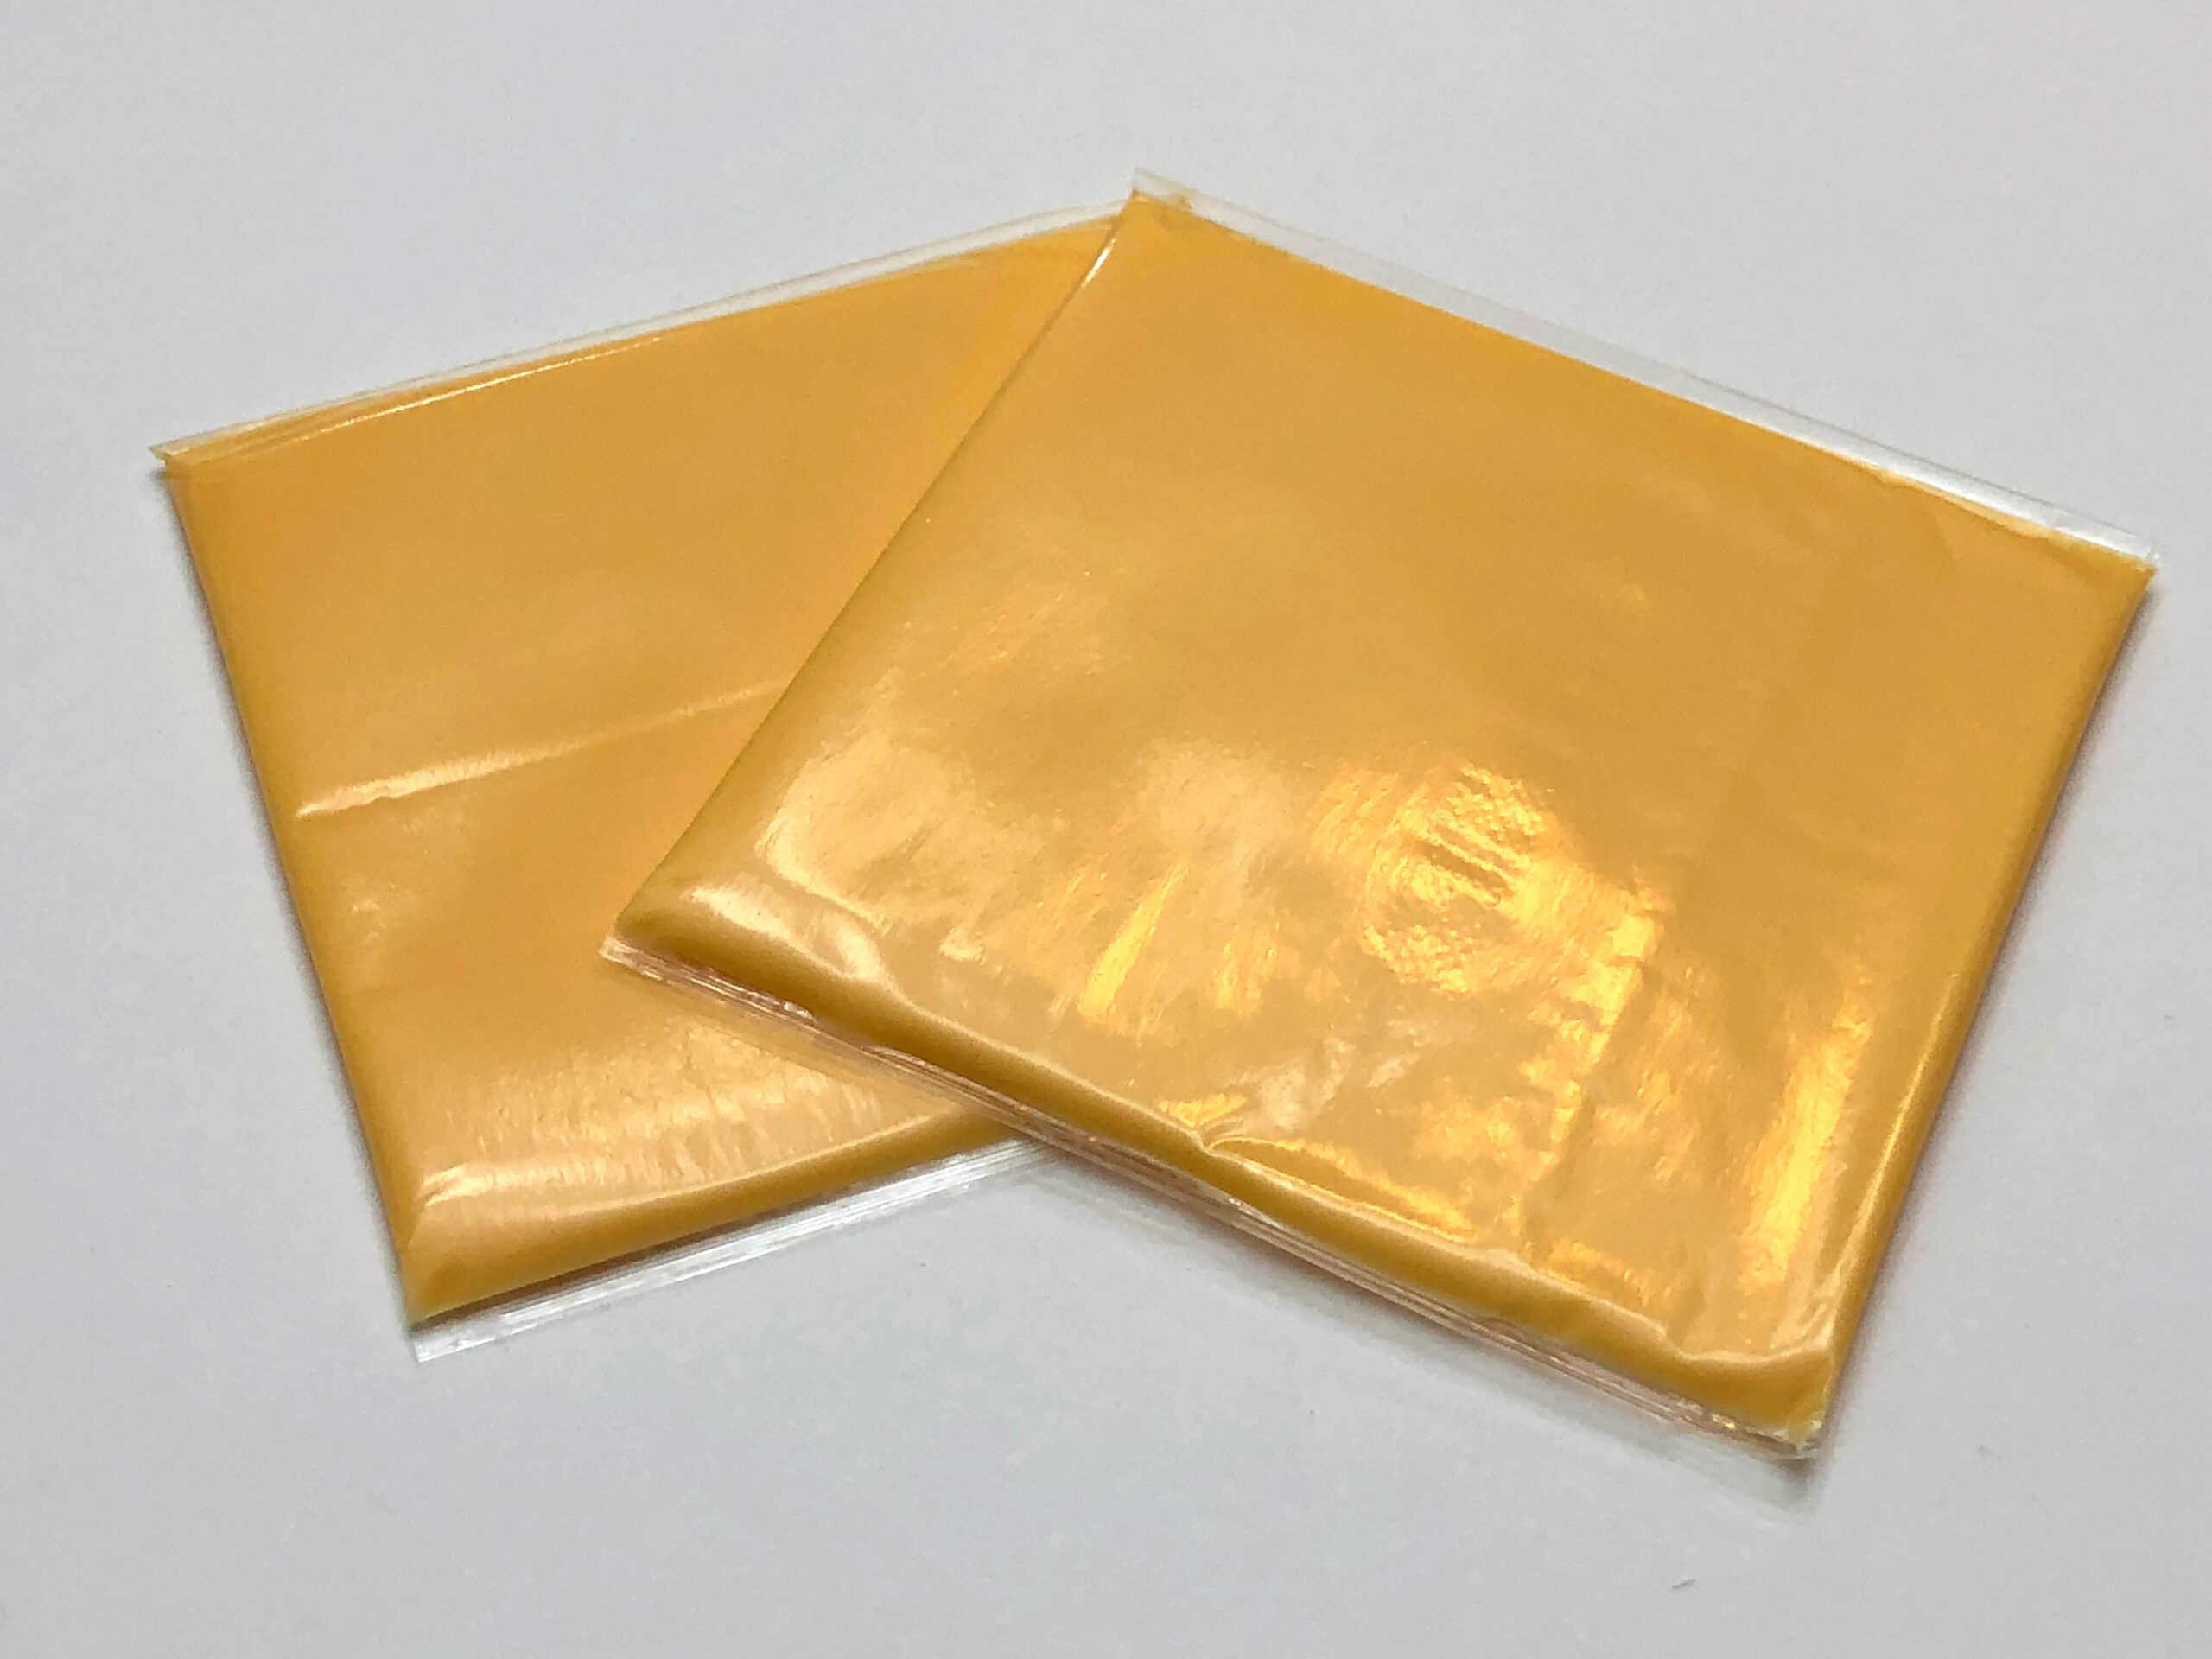 Two Kraft singles cheese slices in the individual wrapping